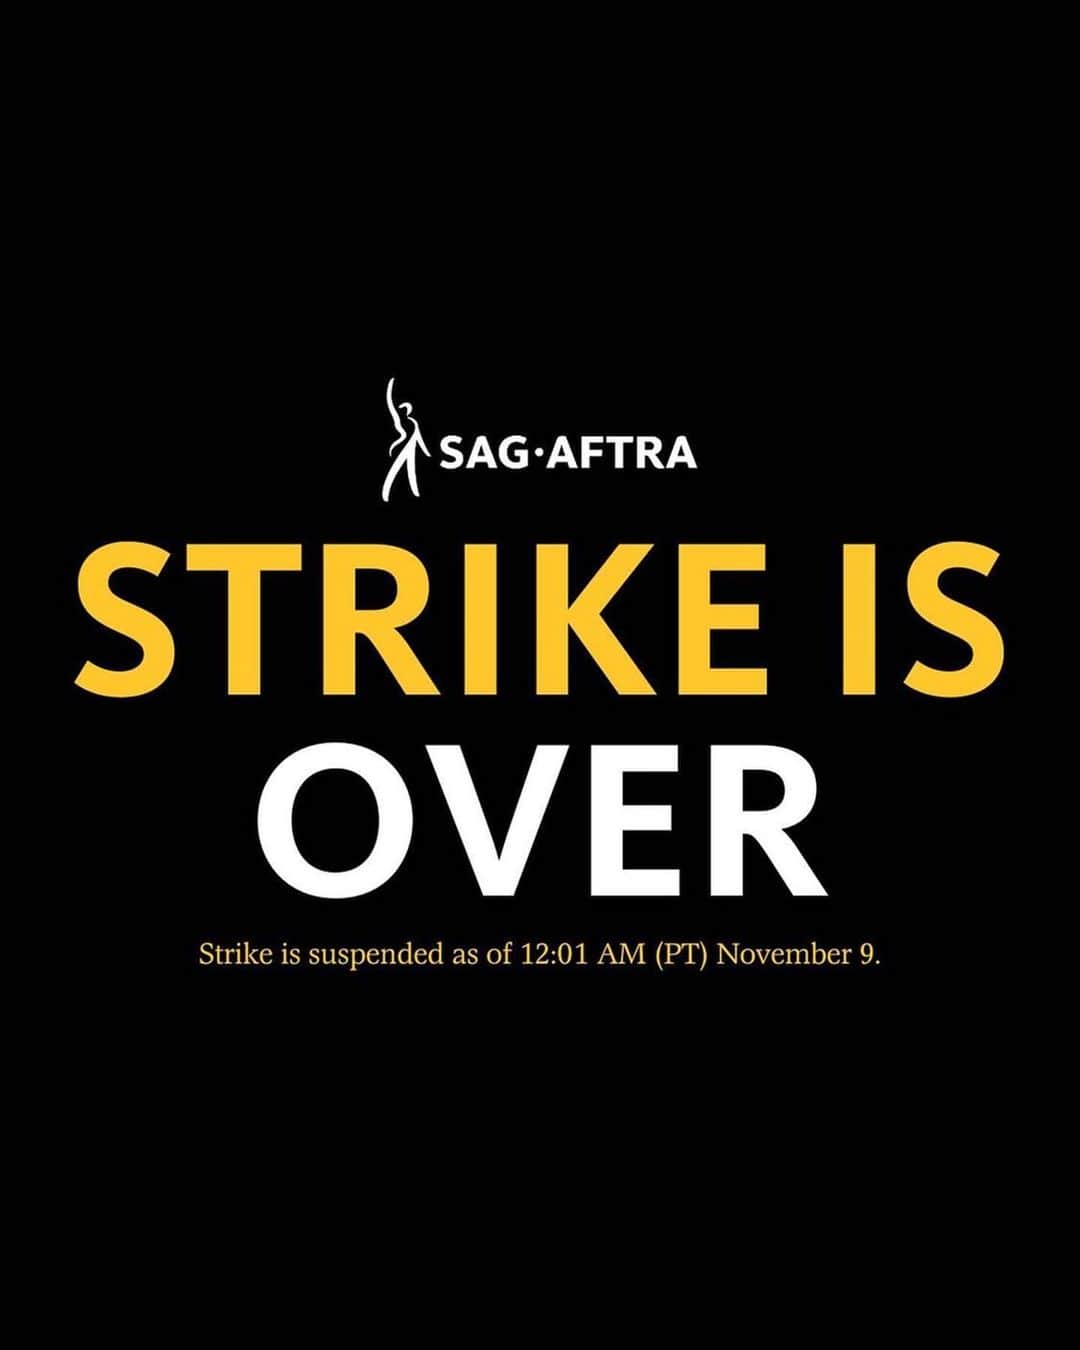 マーク・ハミルのインスタグラム：「AT LAST... they have reached a "tentative" agreement... and I am tentatively thrilled beyond words!!!  #SAGAFTRA_STRONG ✊ #Repost @sagaftra ・・・ THE #SagAftraStrike IS OVER.  Dear #SagAftraMembers:  We are thrilled and proud to tell you that today your TV/Theatrical Negotiating Committee voted unanimously to approve a tentative agreement with the AMPTP. As of 12:01am PT on November 9, our strike is officially suspended and all picket locations are closed. We will be in touch in the coming days with information about celebration gatherings around the country.  In a contract valued at over one billion dollars, we have achieved a deal of extraordinary scope that includes "above-pattern" minimum compensation increases, unprecedented provisions for consent and compensation that will protect members from the threat of AI, and for the first time establishes a streaming participation bonus. Our Pension & Health caps have been substantially raised, which will bring much needed value to our plans. In addition, the deal includes numerous improvements for multiple categories including outsize compensation increases for background performers, and critical contract provisions protecting diverse communities.  We have arrived at a contract that will enable SAG-AFTRA members from every category to build sustainable careers. Many thousands of performers now and into the future will benefit from this work.  Full details of the agreement will not be provided until the tentative agreement is reviewed by the  SAG-AFTRA National Board.  We also thank our union siblings -- the workers that power this industry -- for the sacrifices they have made while supporting our strike and that of the Writers Guild of America. We stand together in solidarity and will be there for you when you need us.   Thank you all for your dedication, your commitment and your solidarity throughout this strike. It is because of YOU that these improvements became possible.  In solidarity and gratitude, Your TV/Theatrical Negotiating Committee」